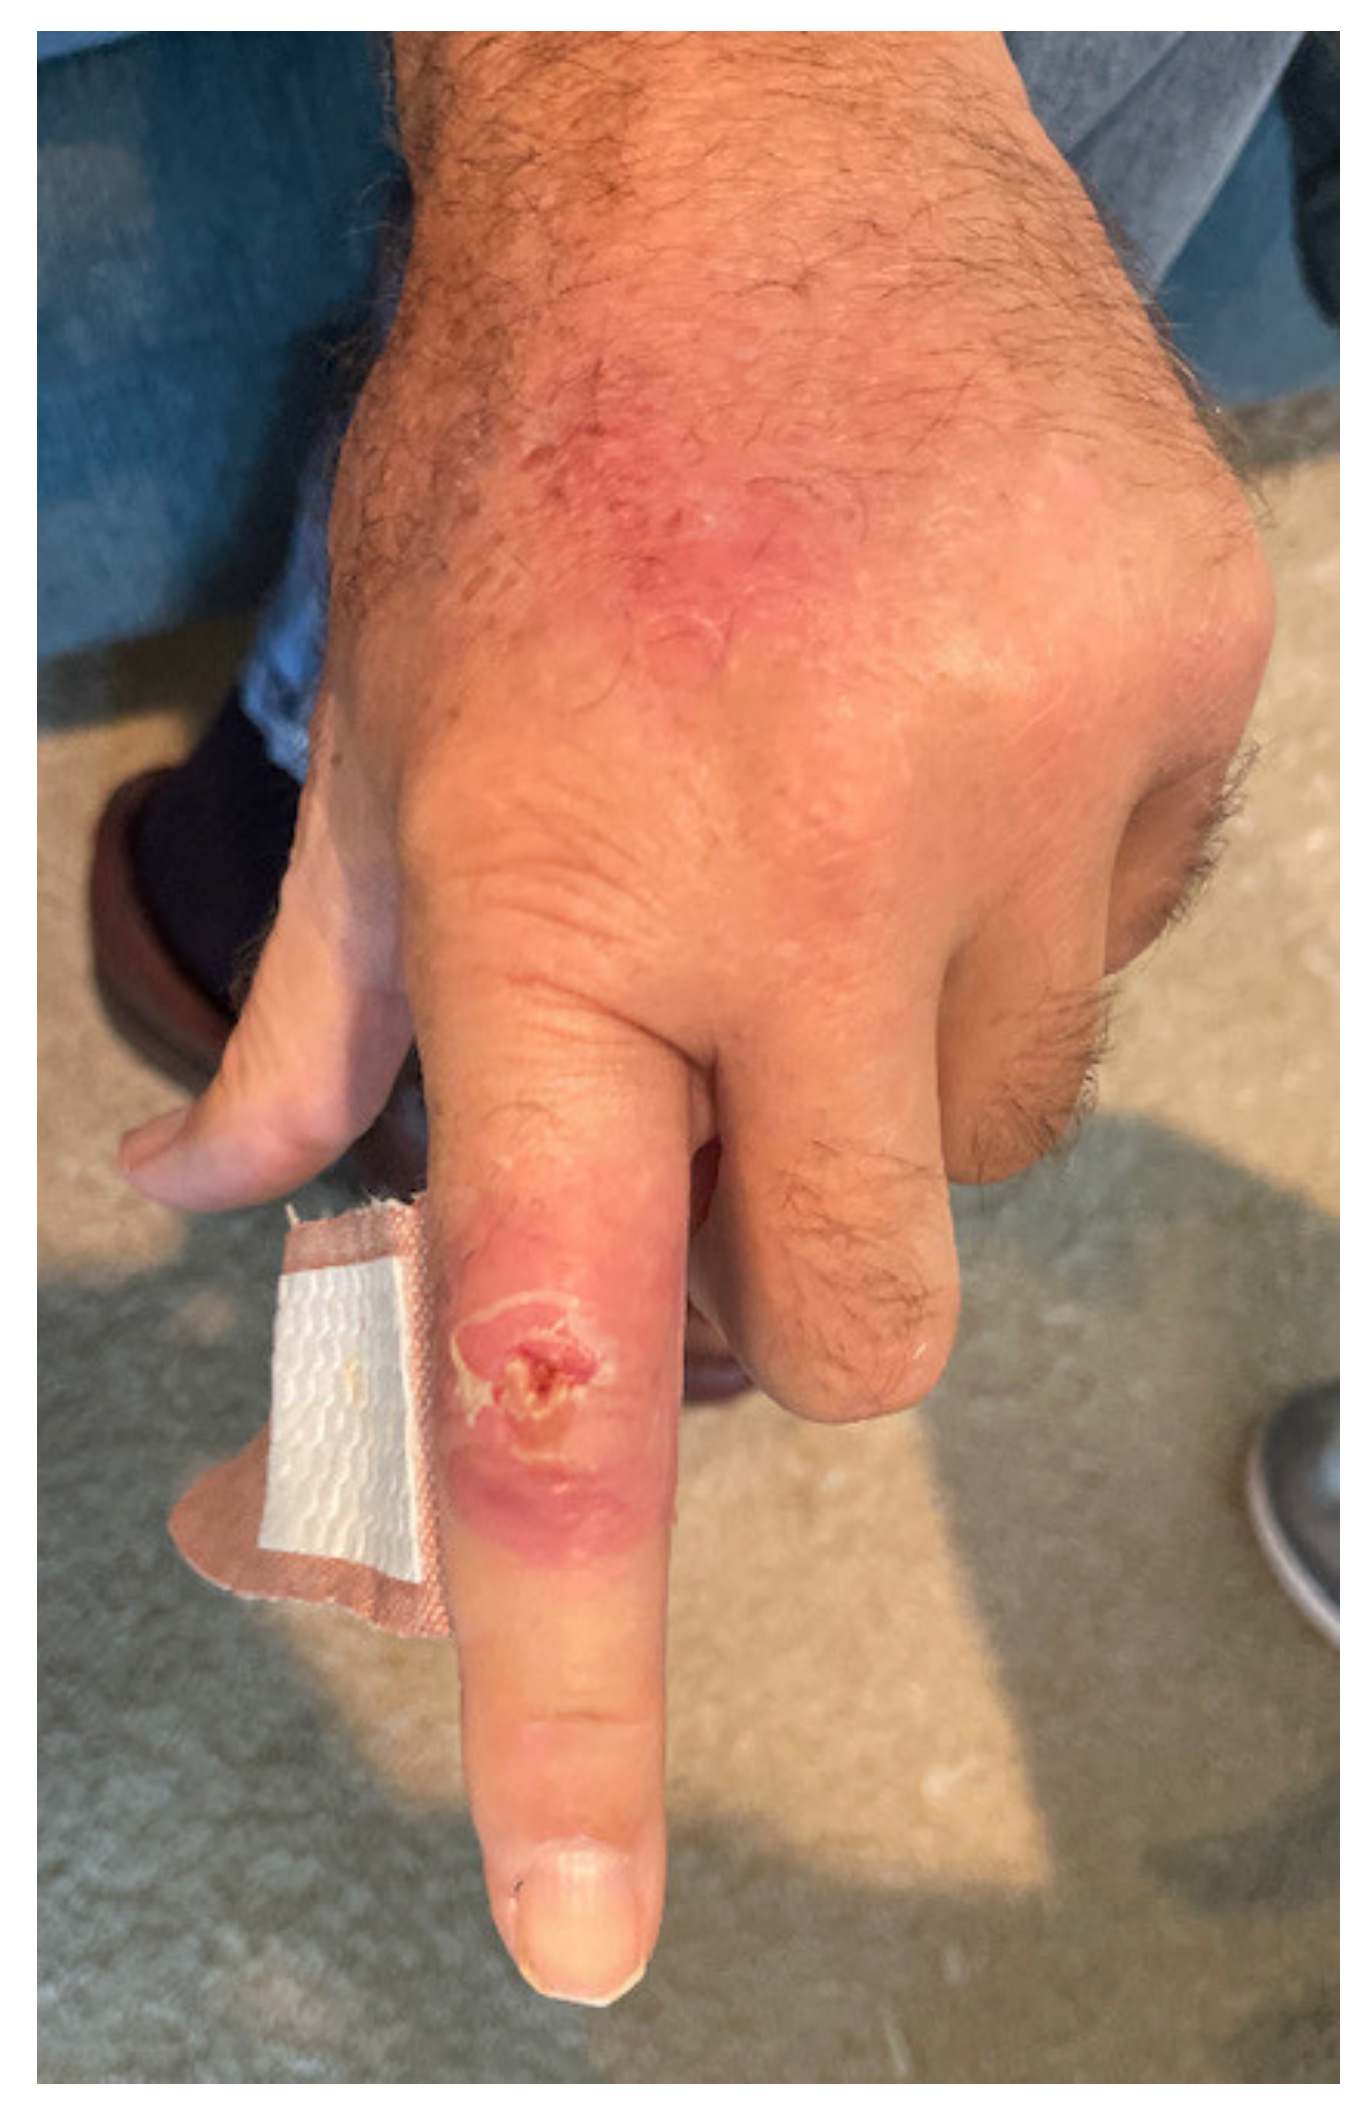 Medicina | Free Full-Text | Primary Lymphocutaneous Nocardia brasiliensis  in an Immunocompetent Host: Case Report and Literature Review | HTML